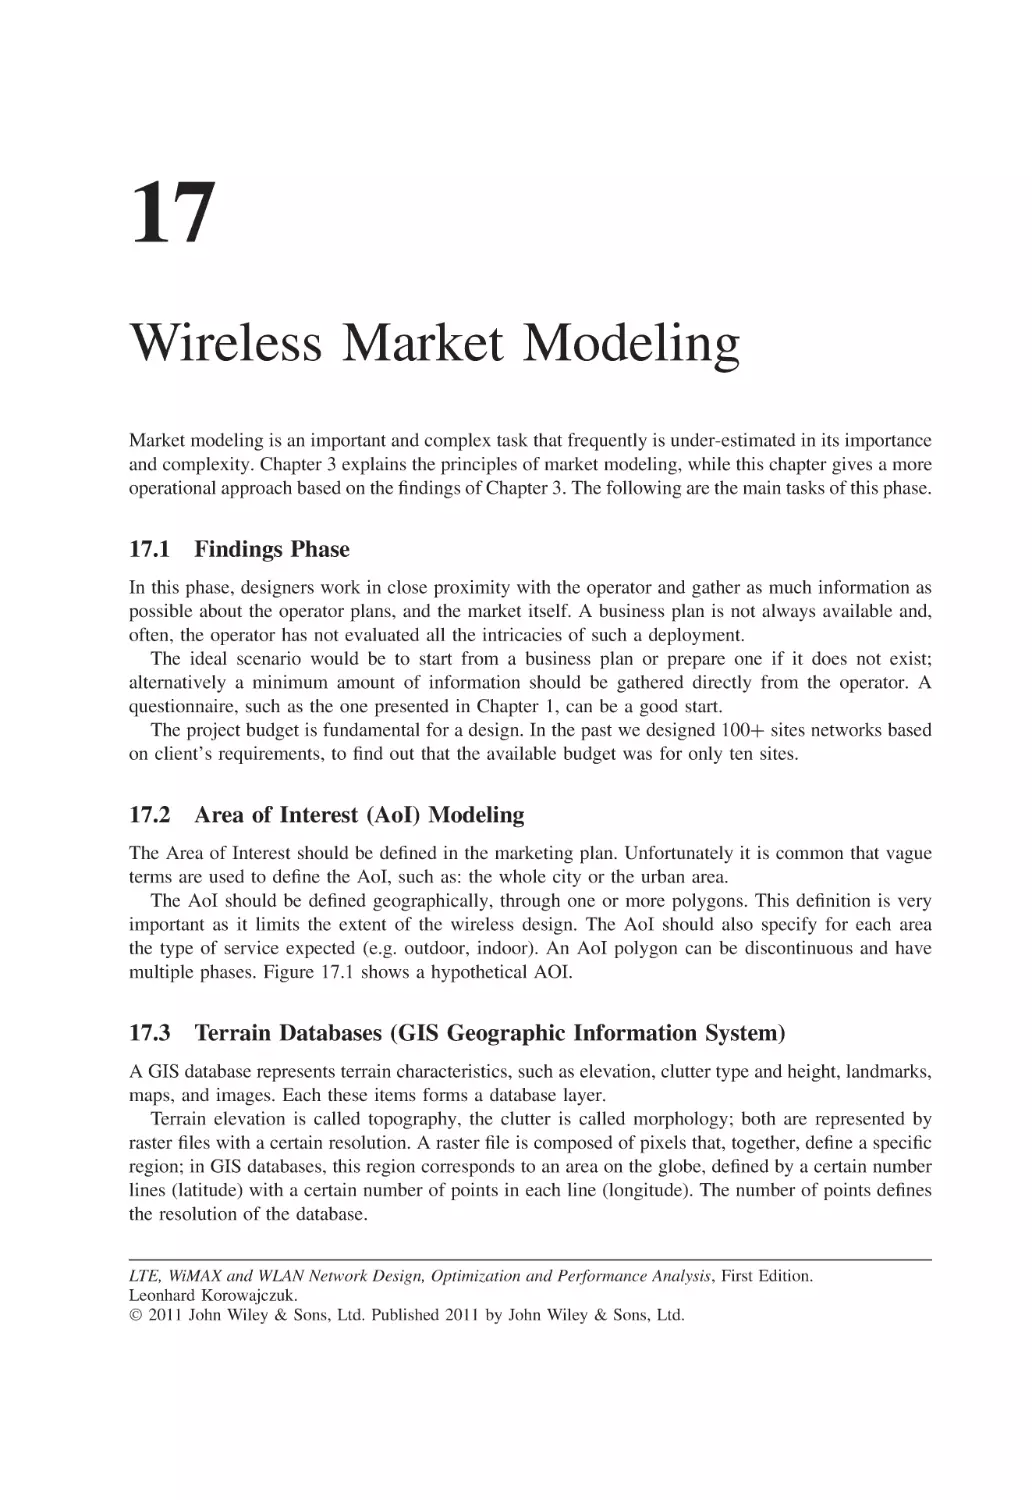 17 Wireless Market Modeling
17.1 Findings Phase
17.2 Area of Interest (AoI) Modeling
17.3 Terrain Databases (GIS Geographic Information System)